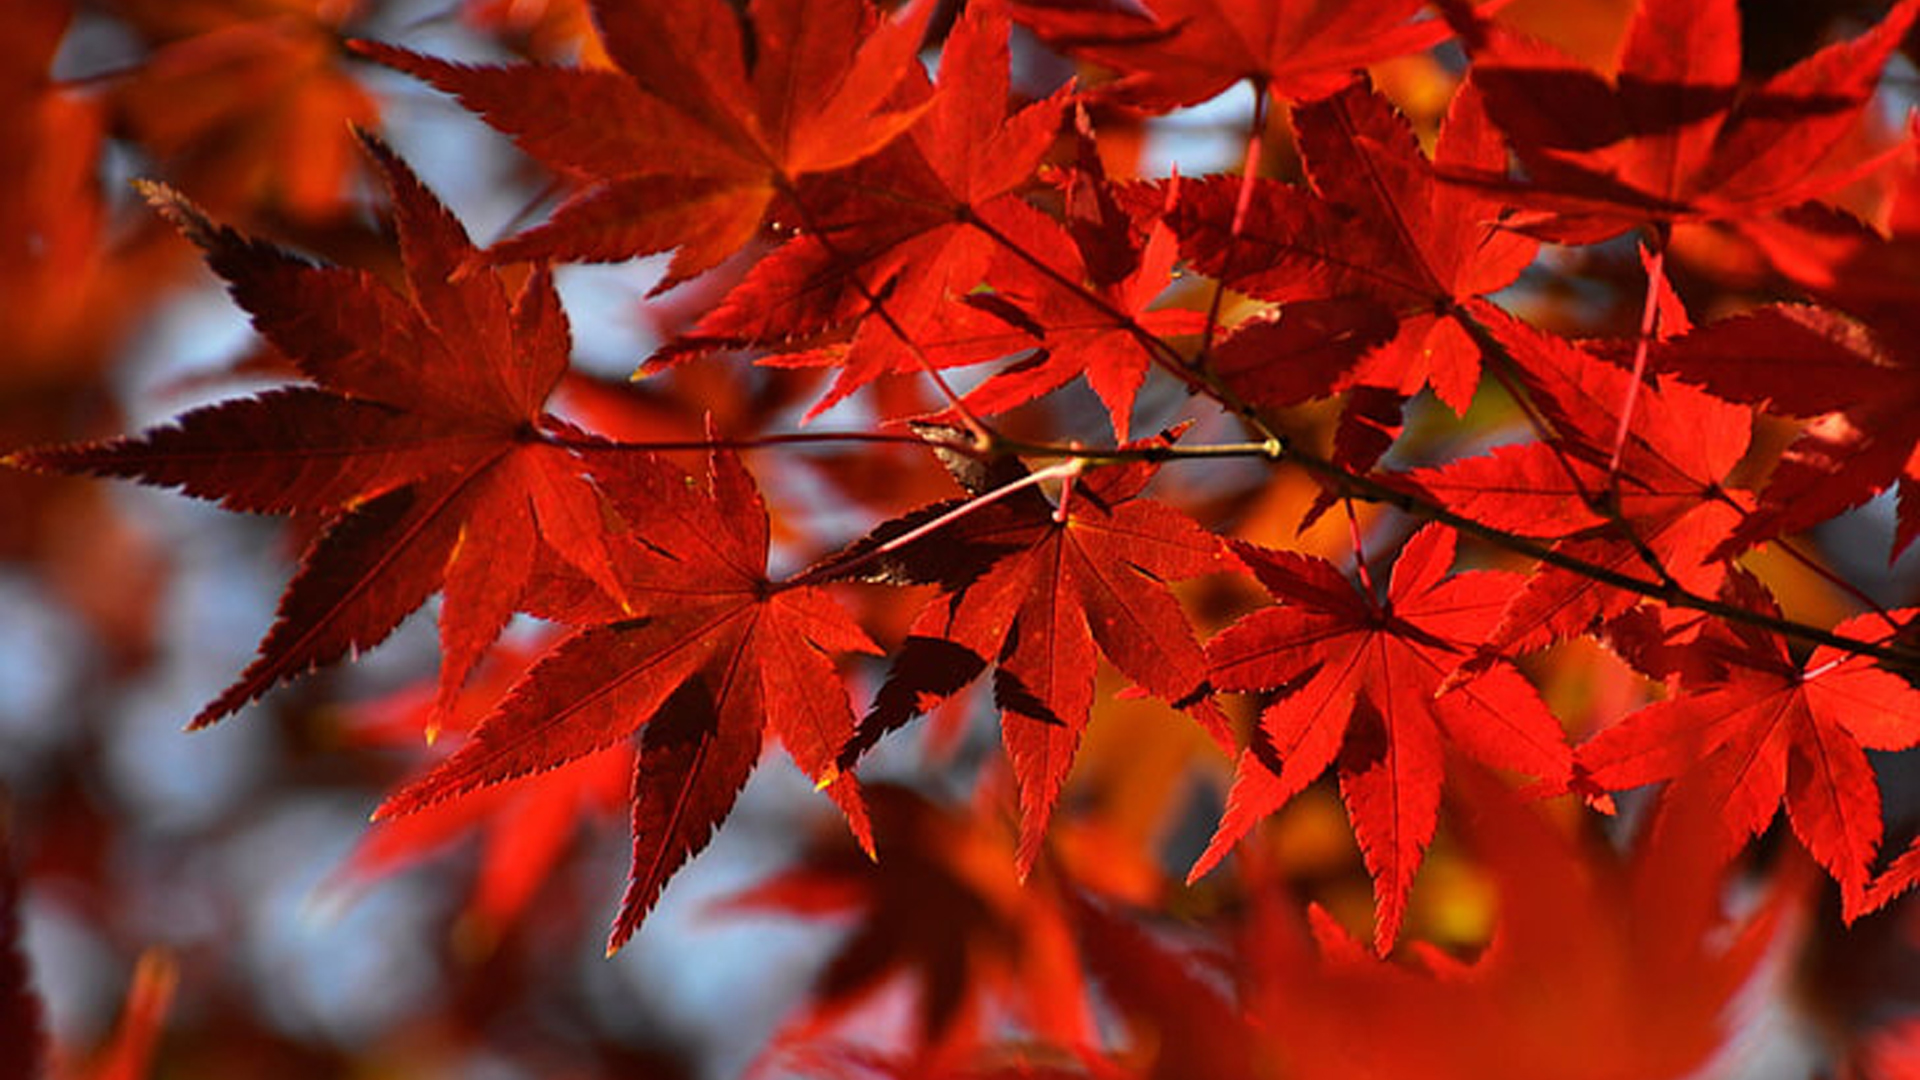 Red Autumn Fall Leaves Maple Tree Branches 2K Autumn